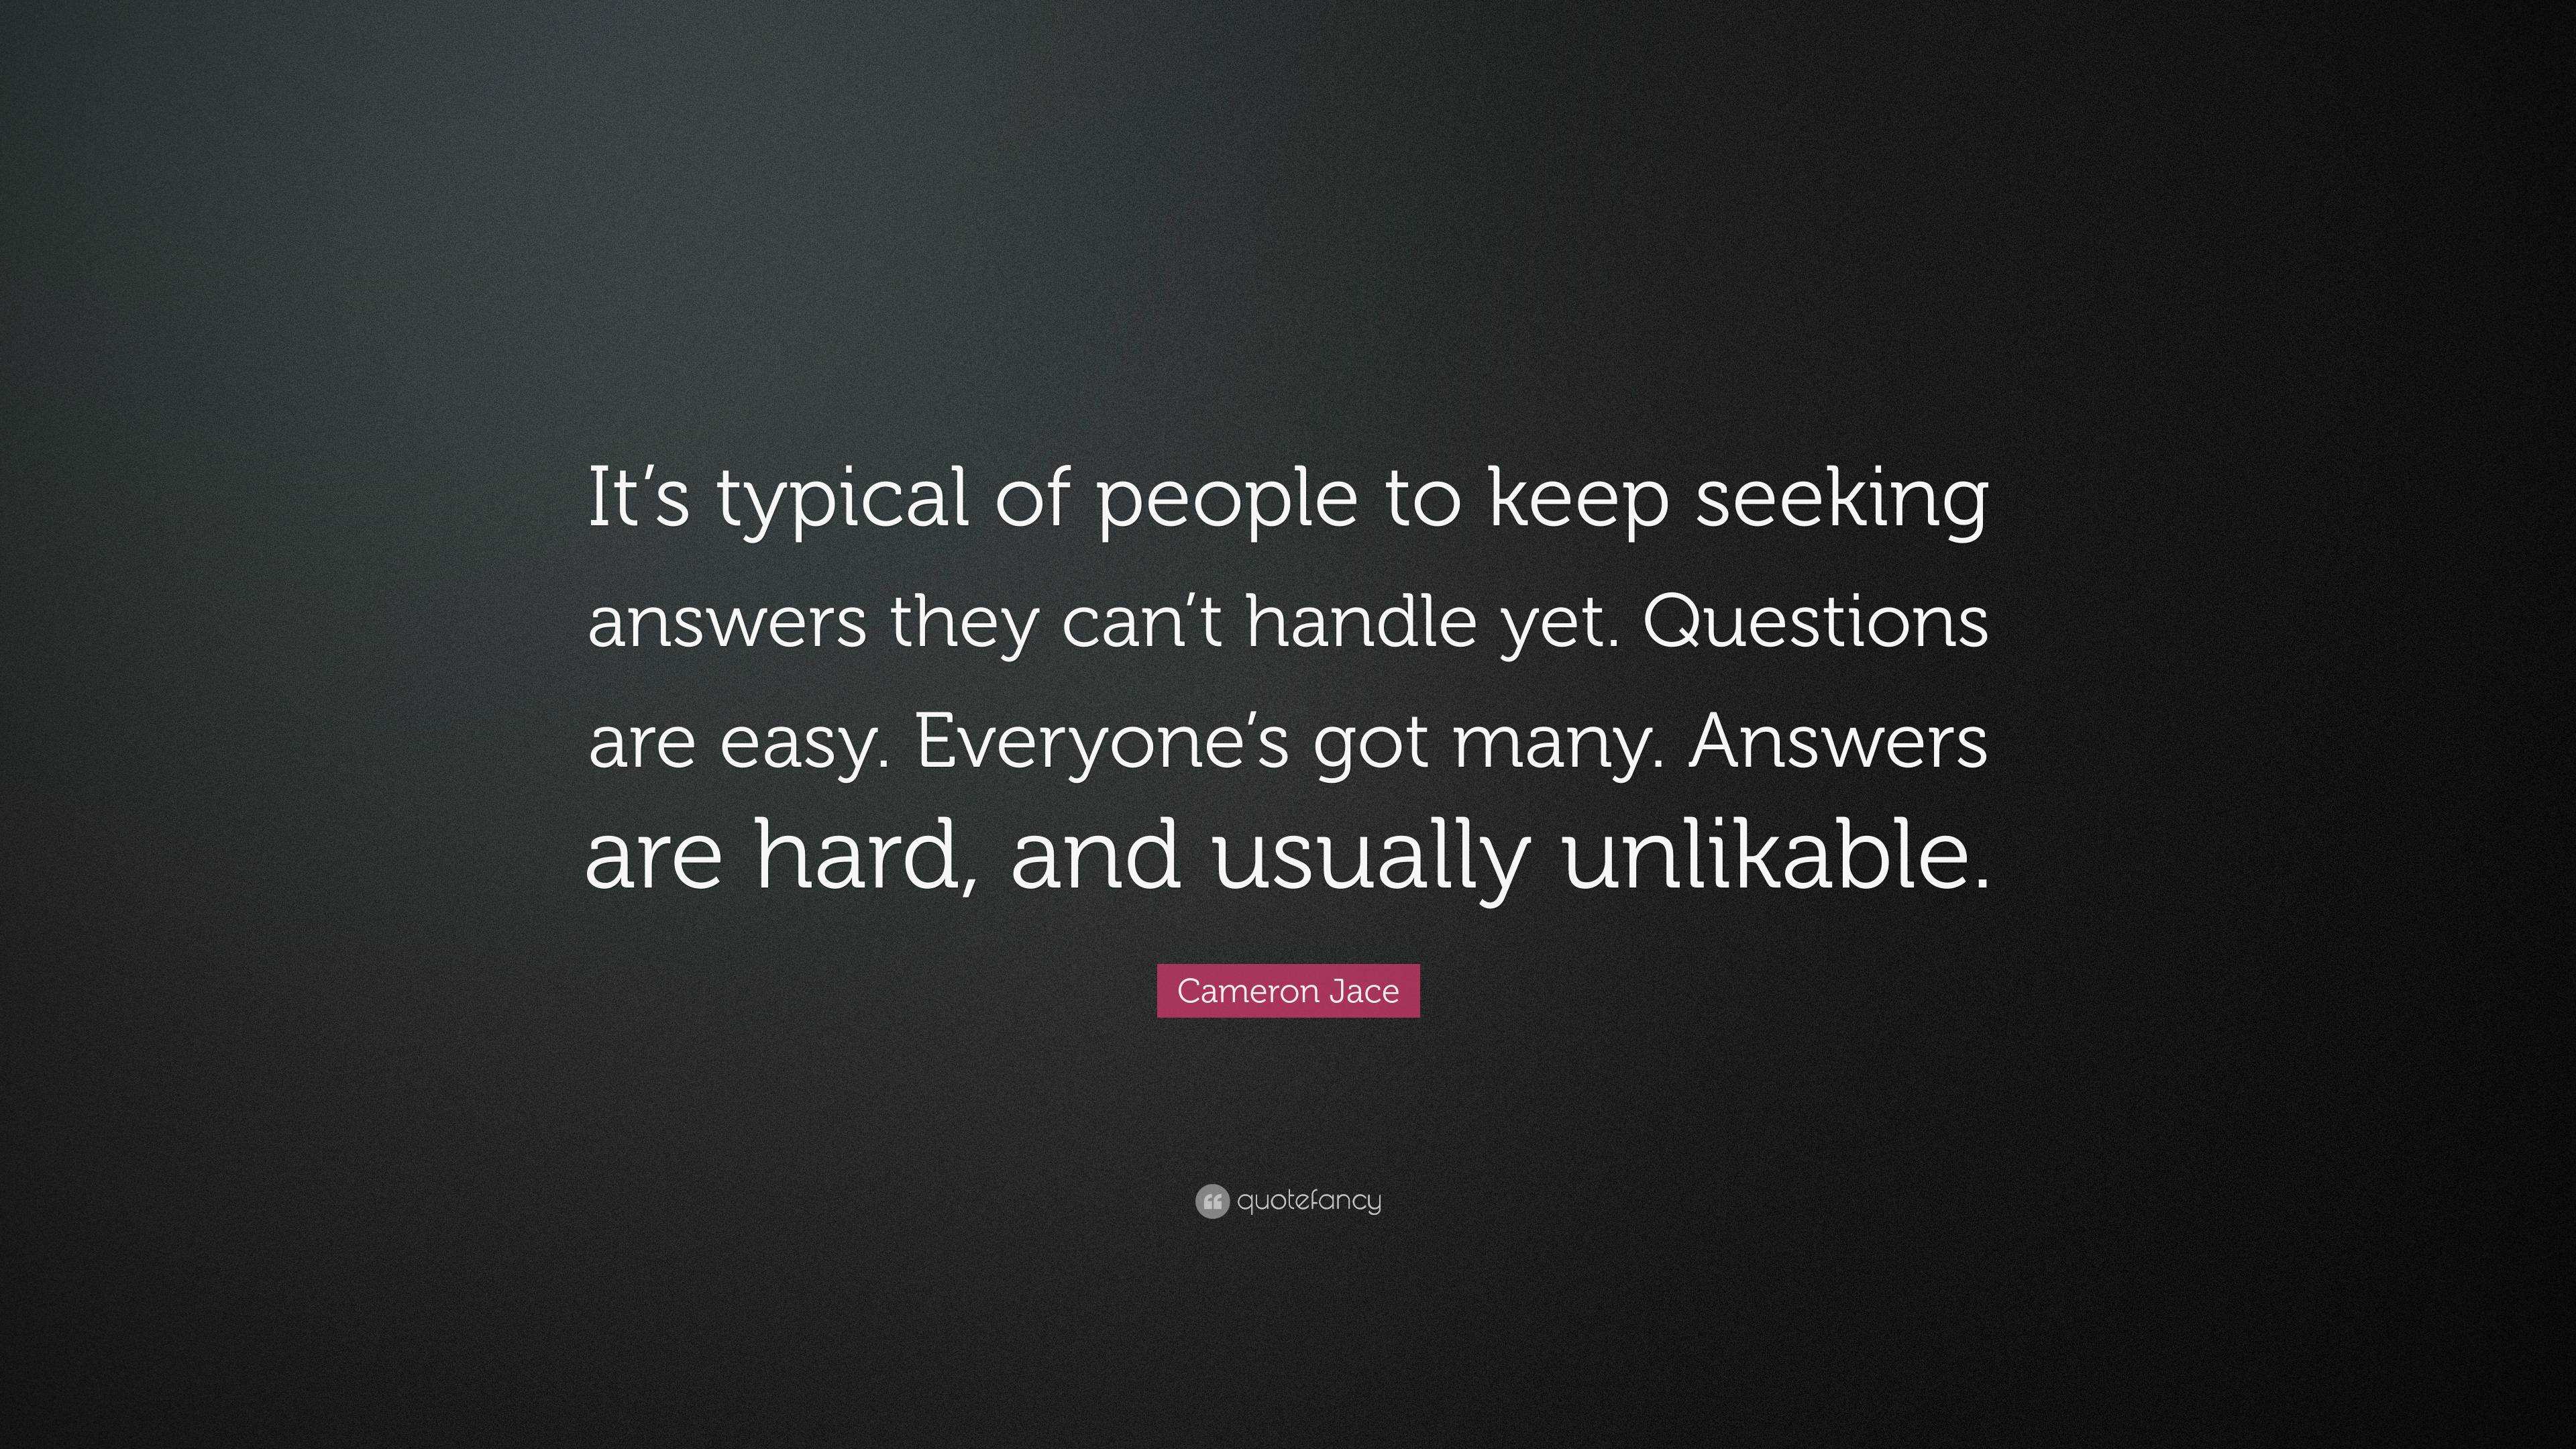 Cameron Jace Quote: “It’s typical of people to keep seeking answers ...